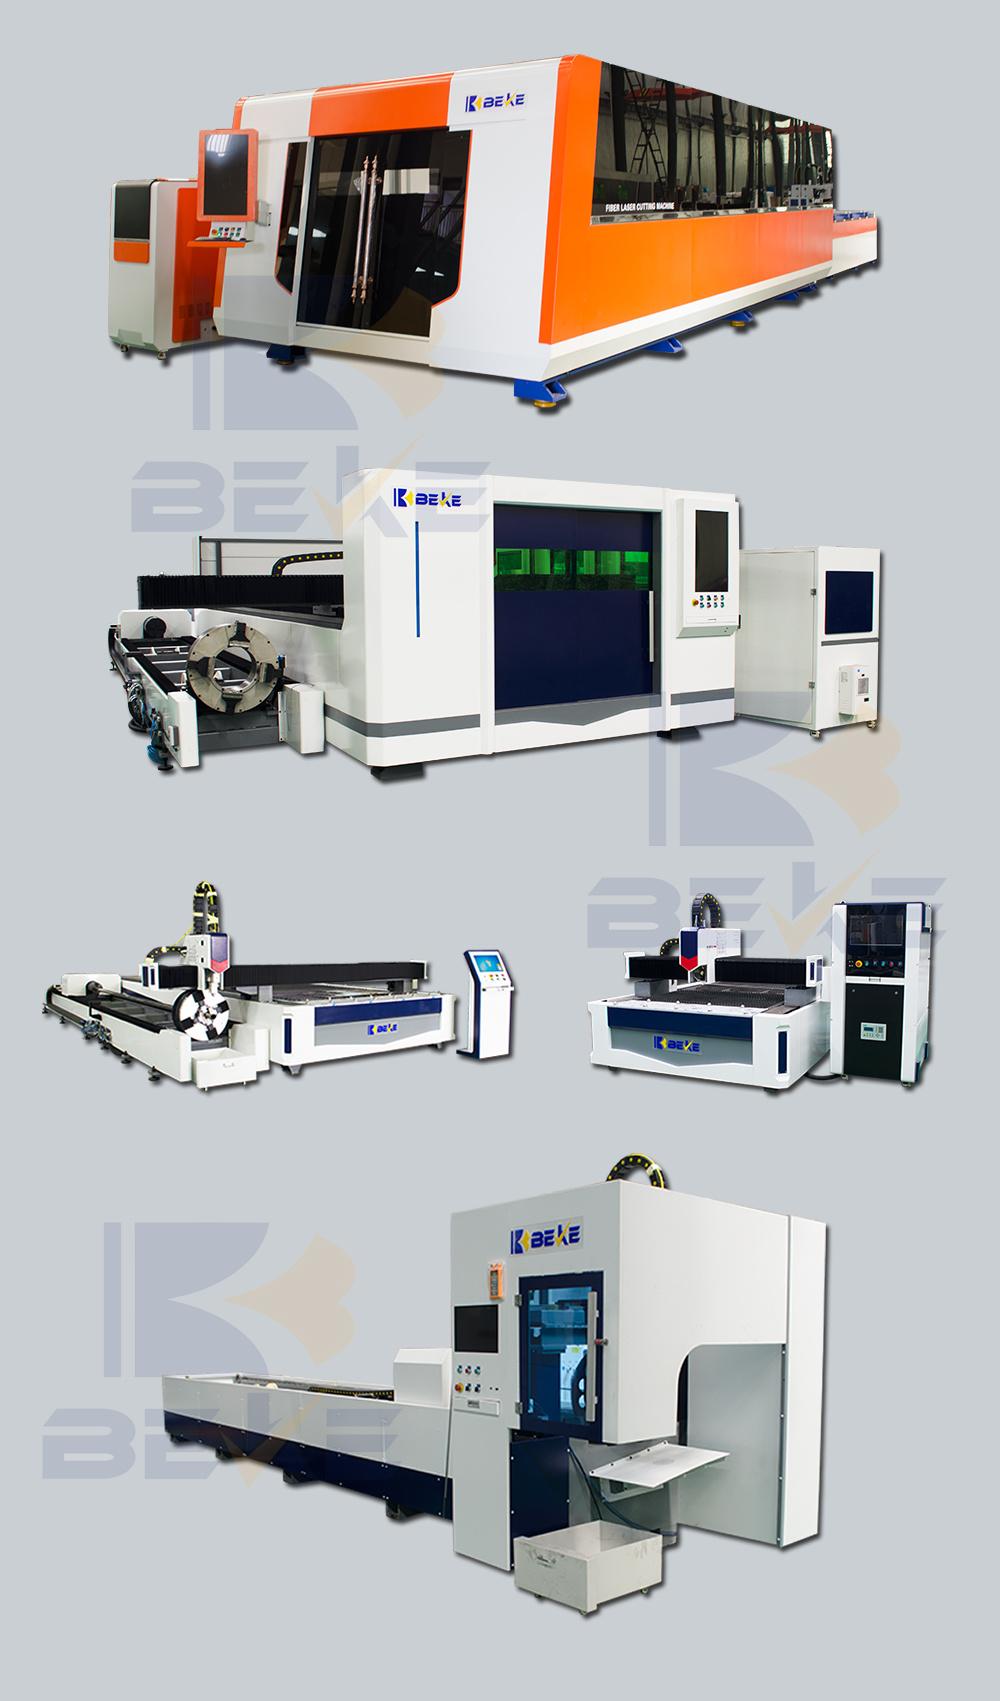 Beke Brand High Performance 4000W Closed Type Tube Pipe Laser Cutter